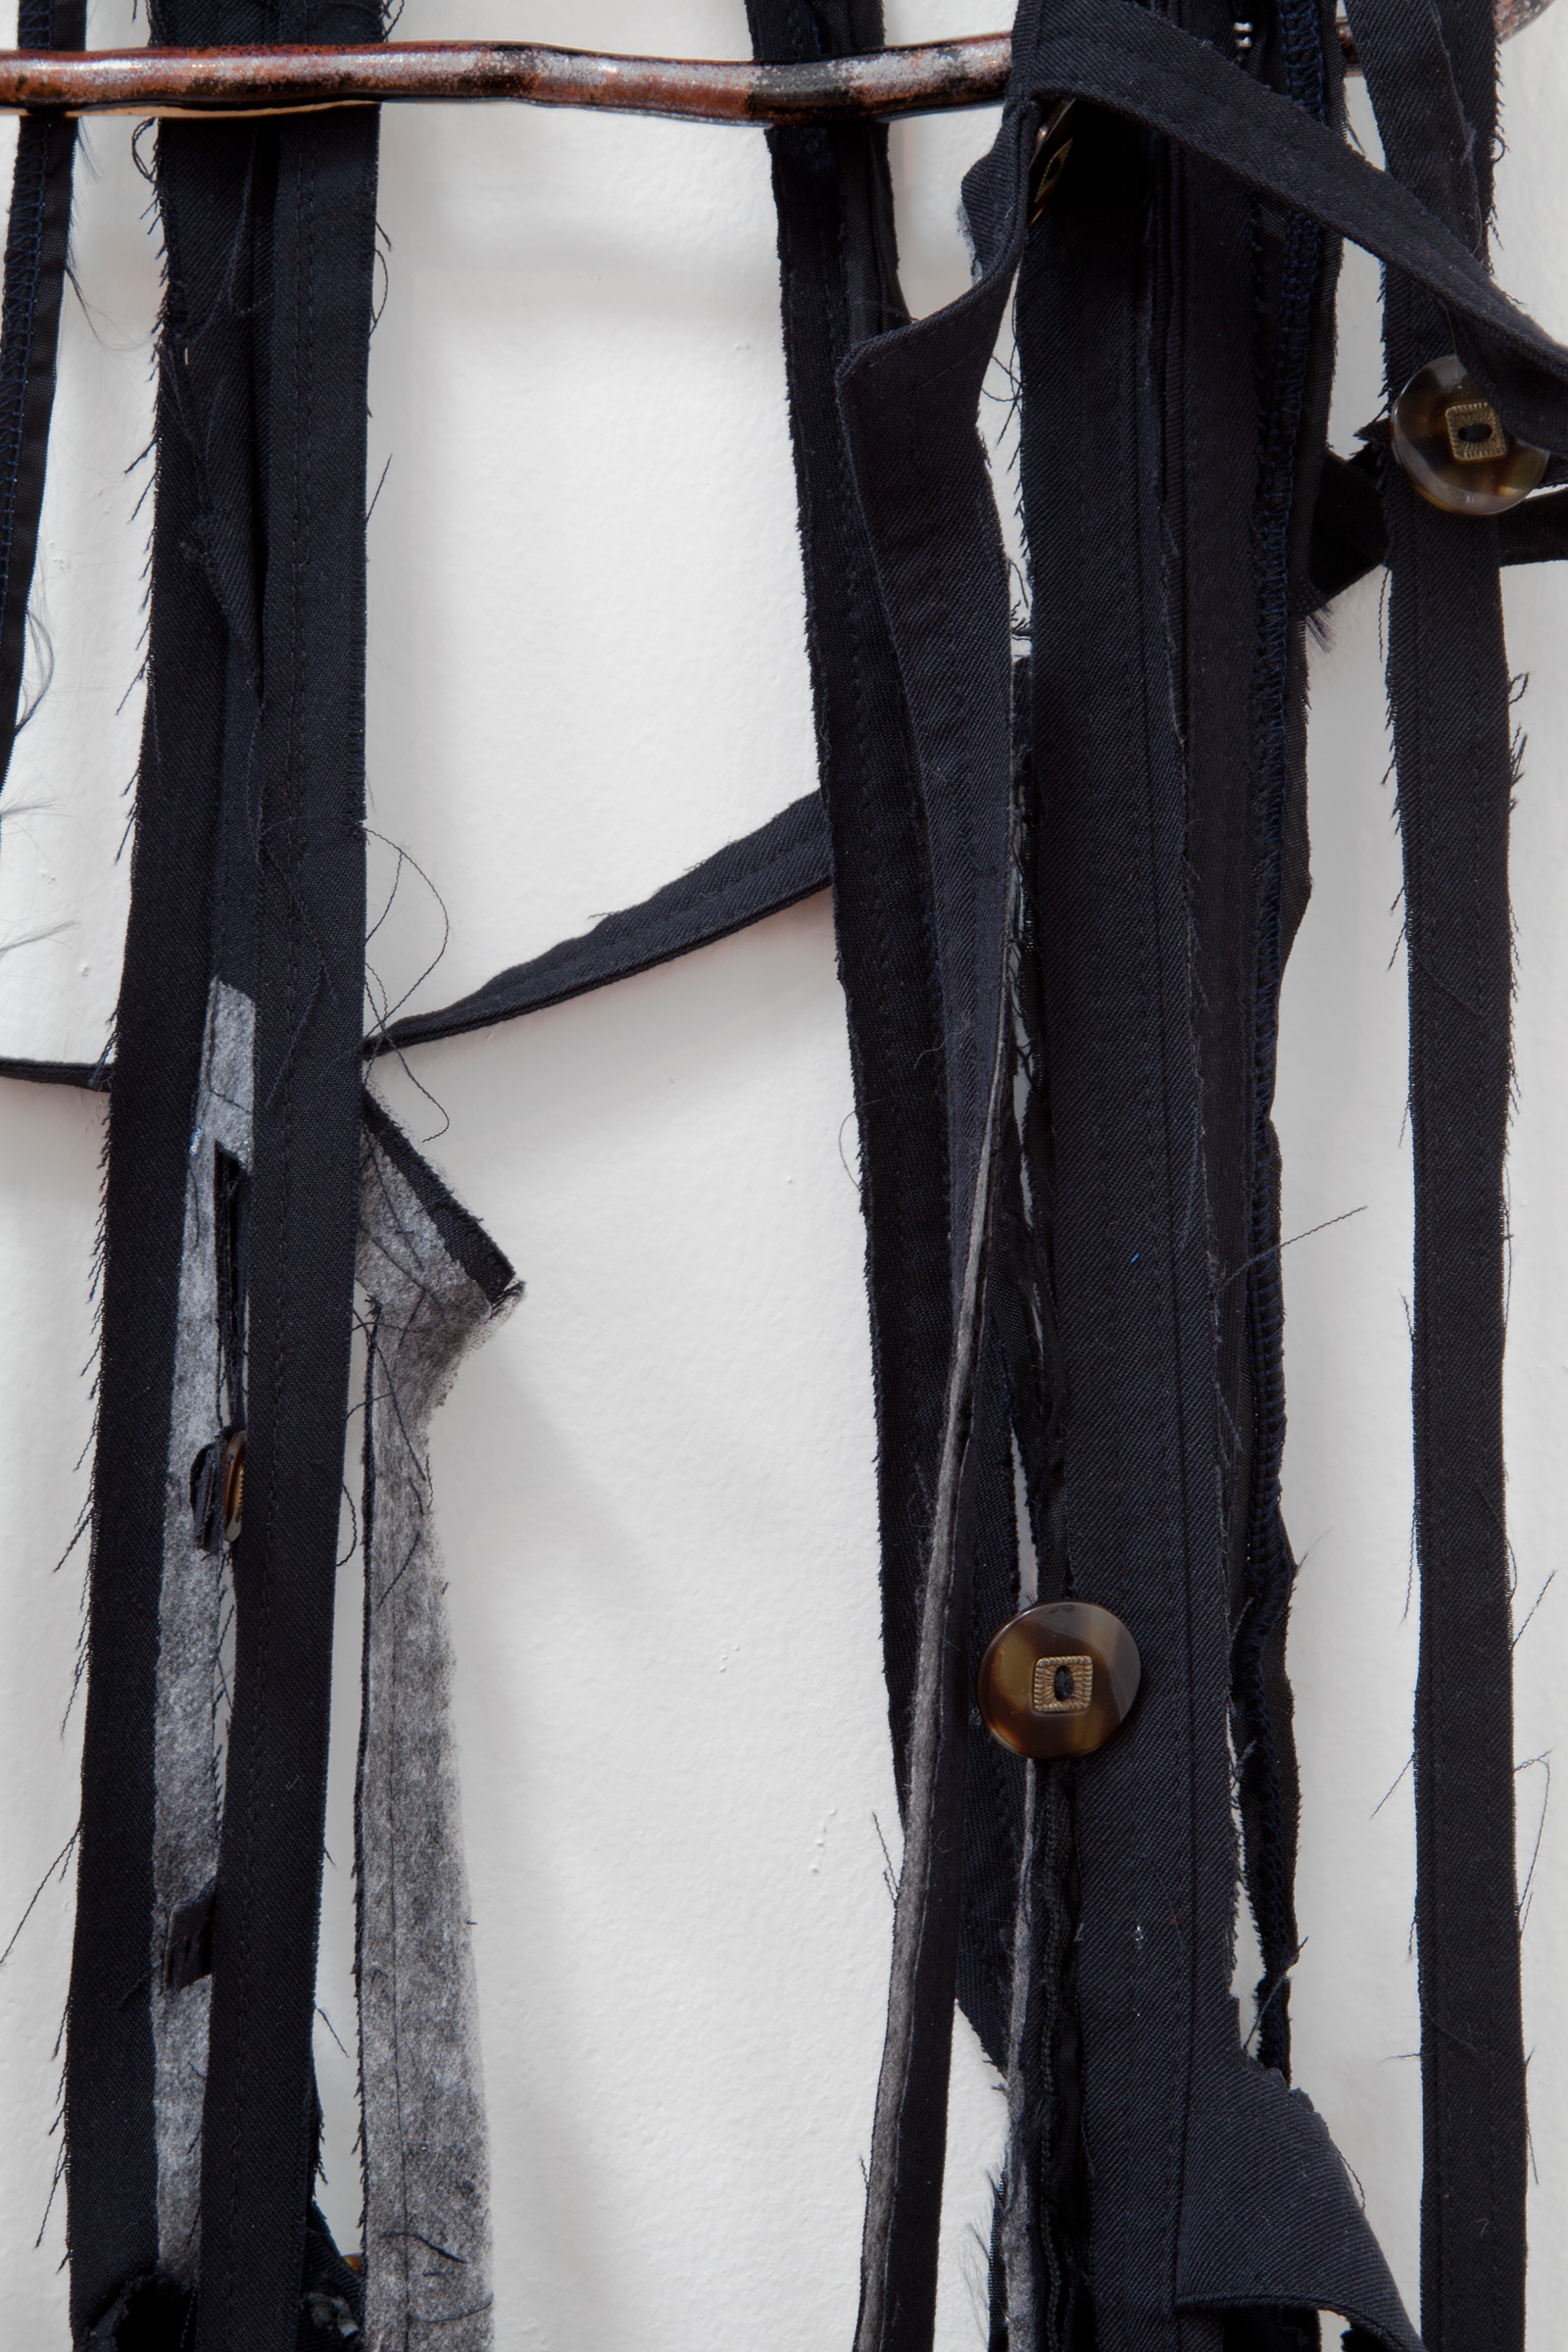   ANNA SEW HOY  (detail)&nbsp; black/noire , fired stoneware, trench coat and resin finger hook, 62.5" x 16.5" x 4", 2012 